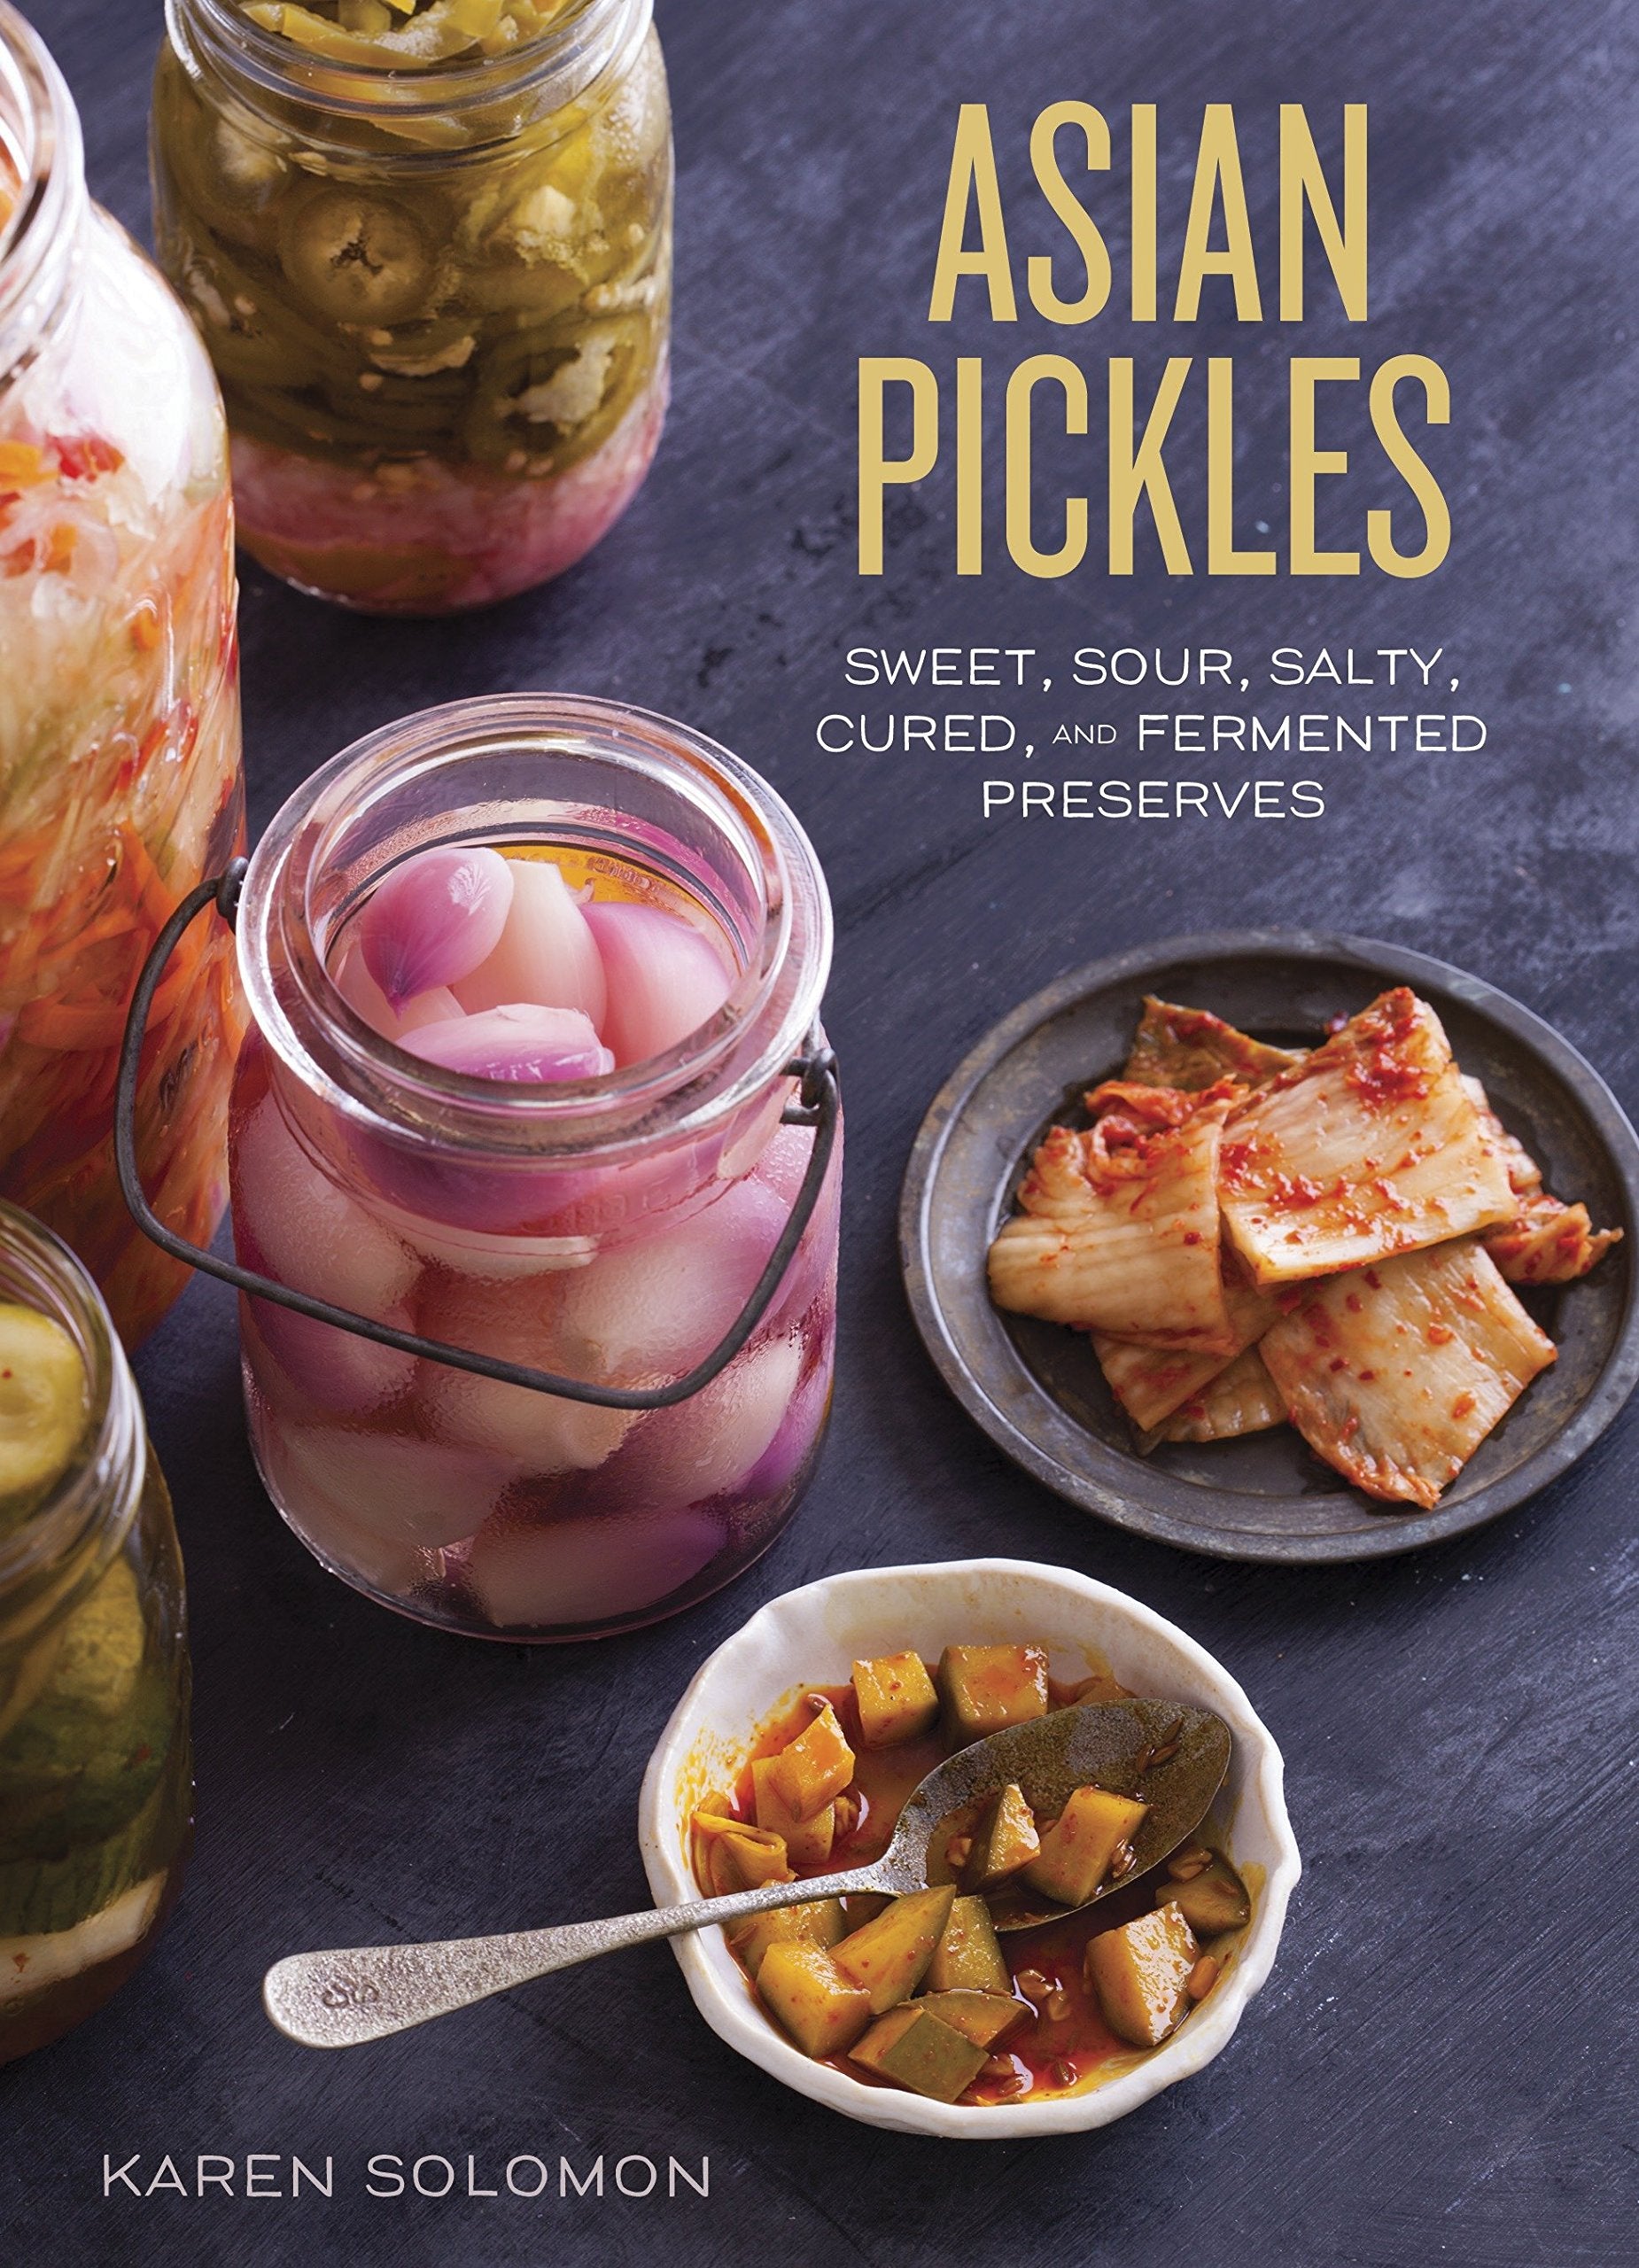 Asian Pickles: Sweet, Sour, Salty, Cured, and Fermented Preserves from Korea, Japan, China, India, and Beyond (Karen Solomon)